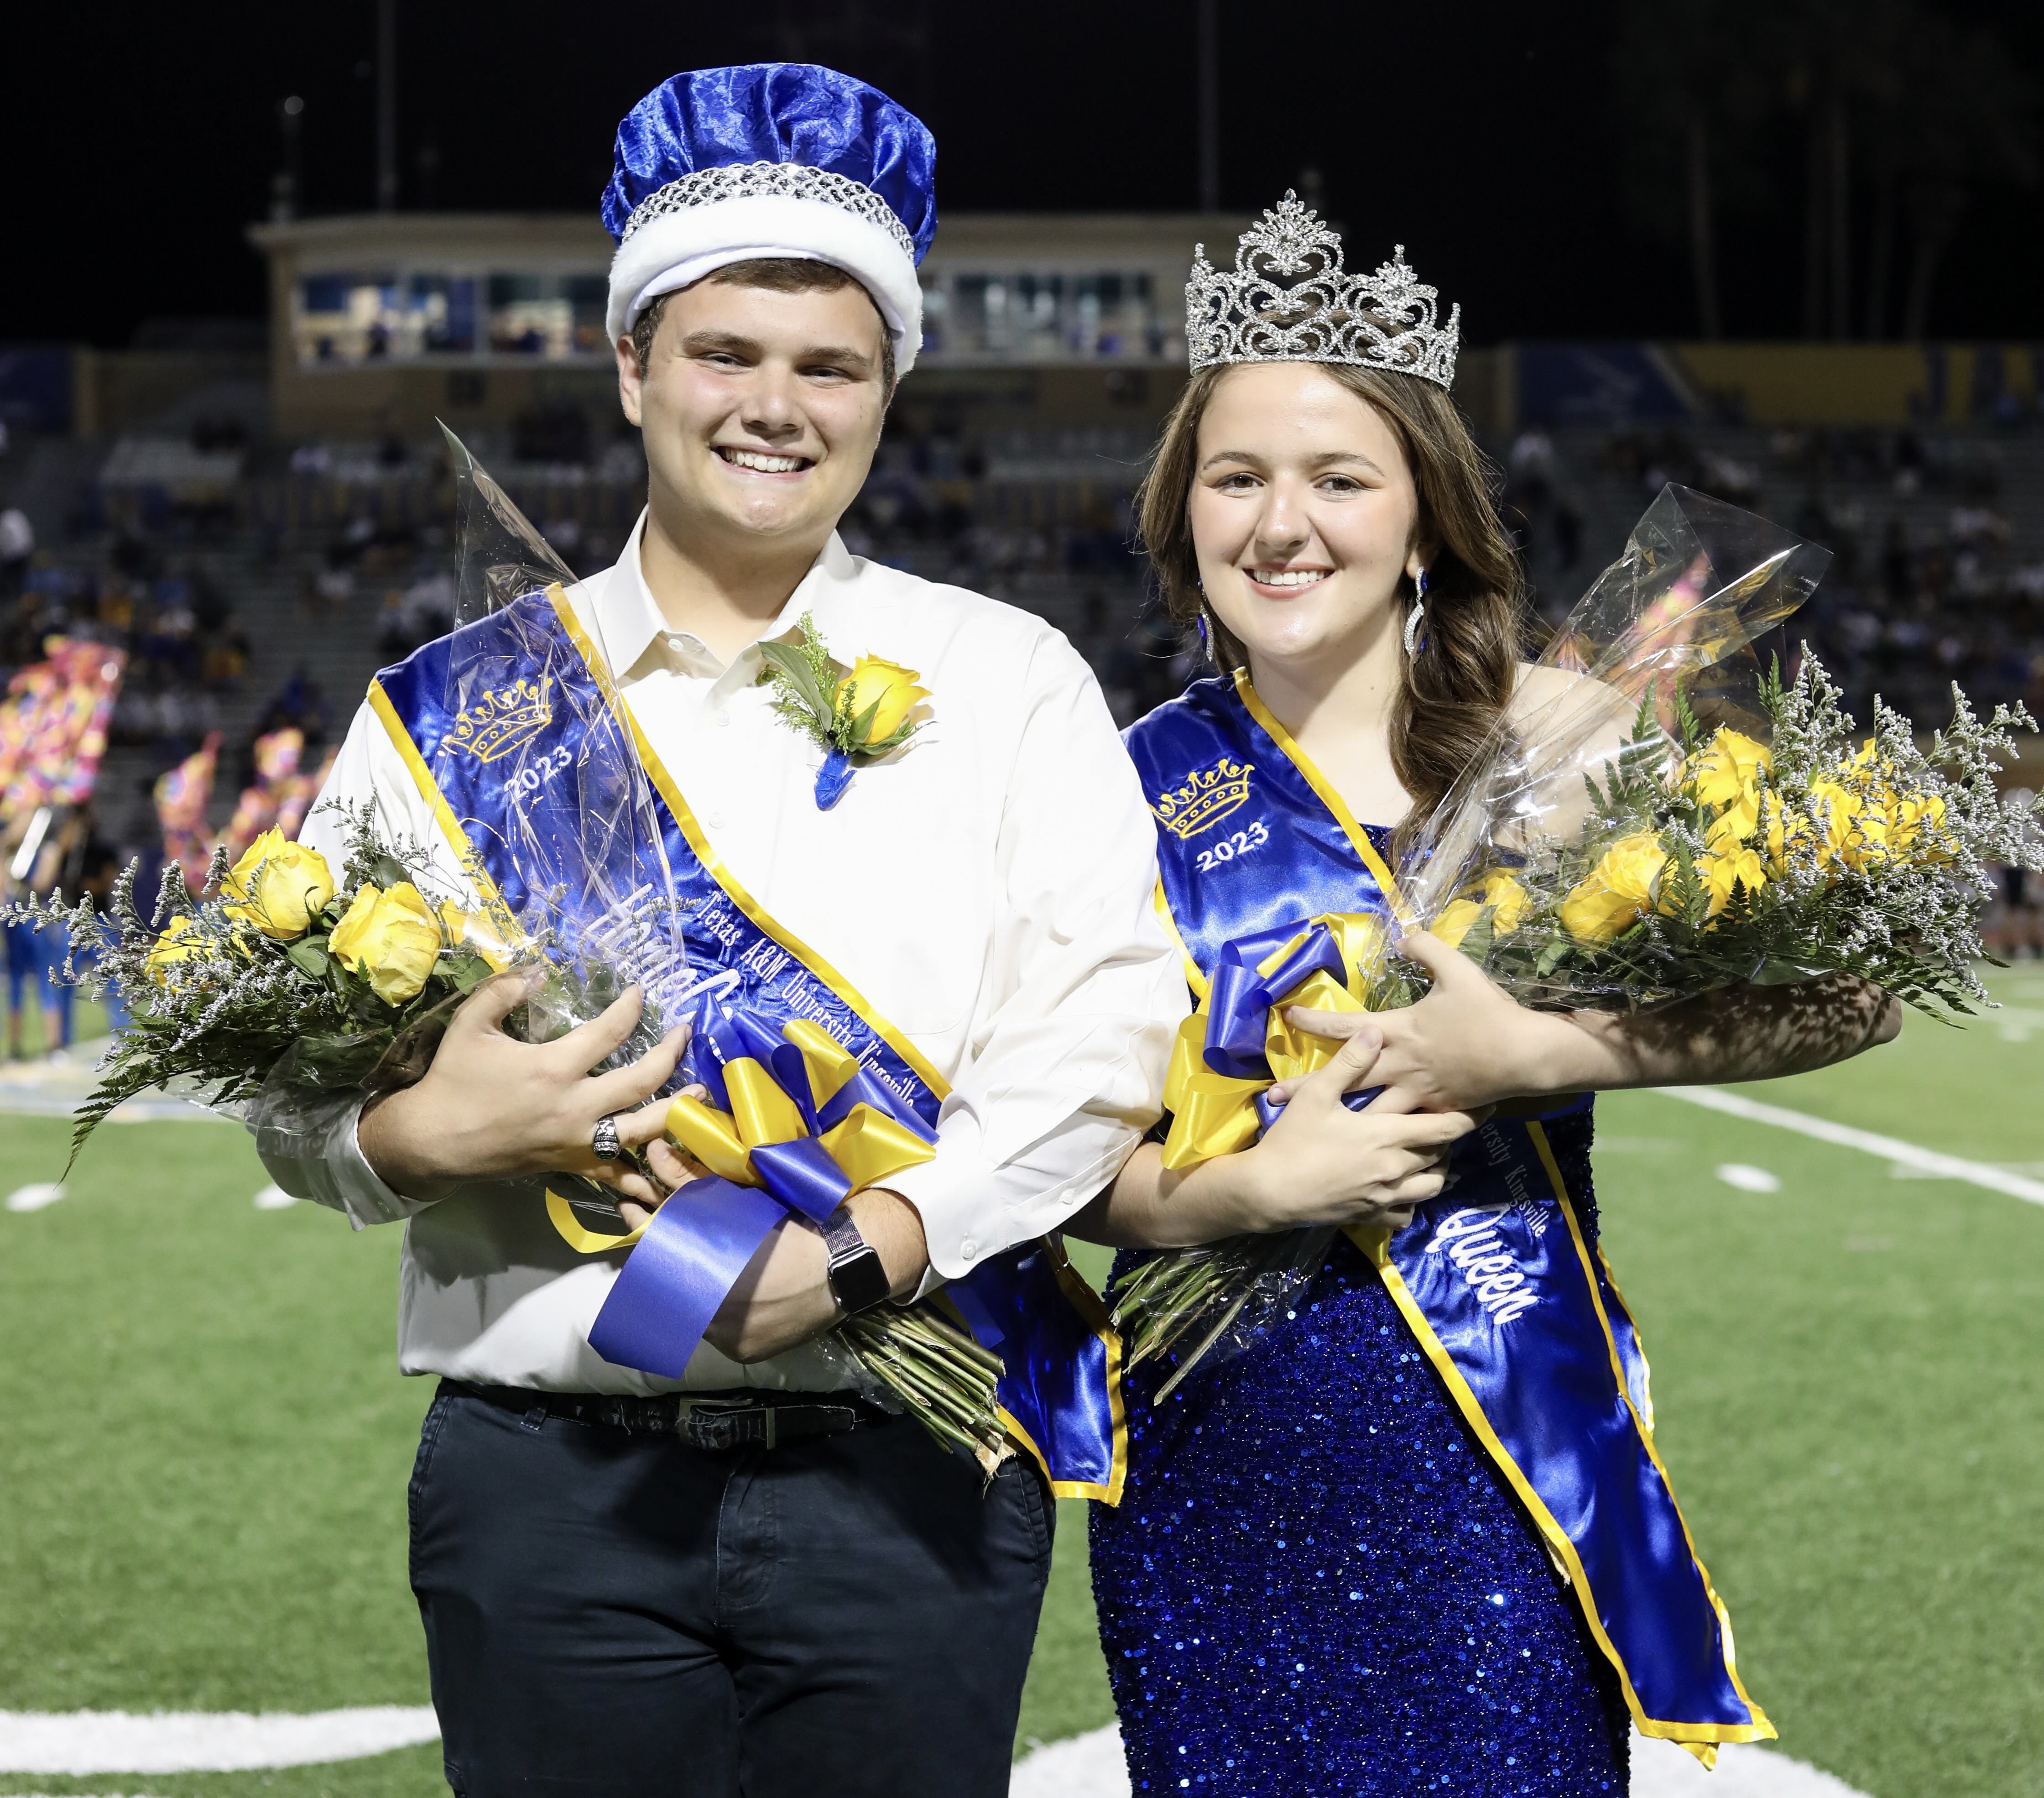 HOMECOMING KING AND QUEEN HARLEY DAVIS AND SOPHIA YZAGUIRRE